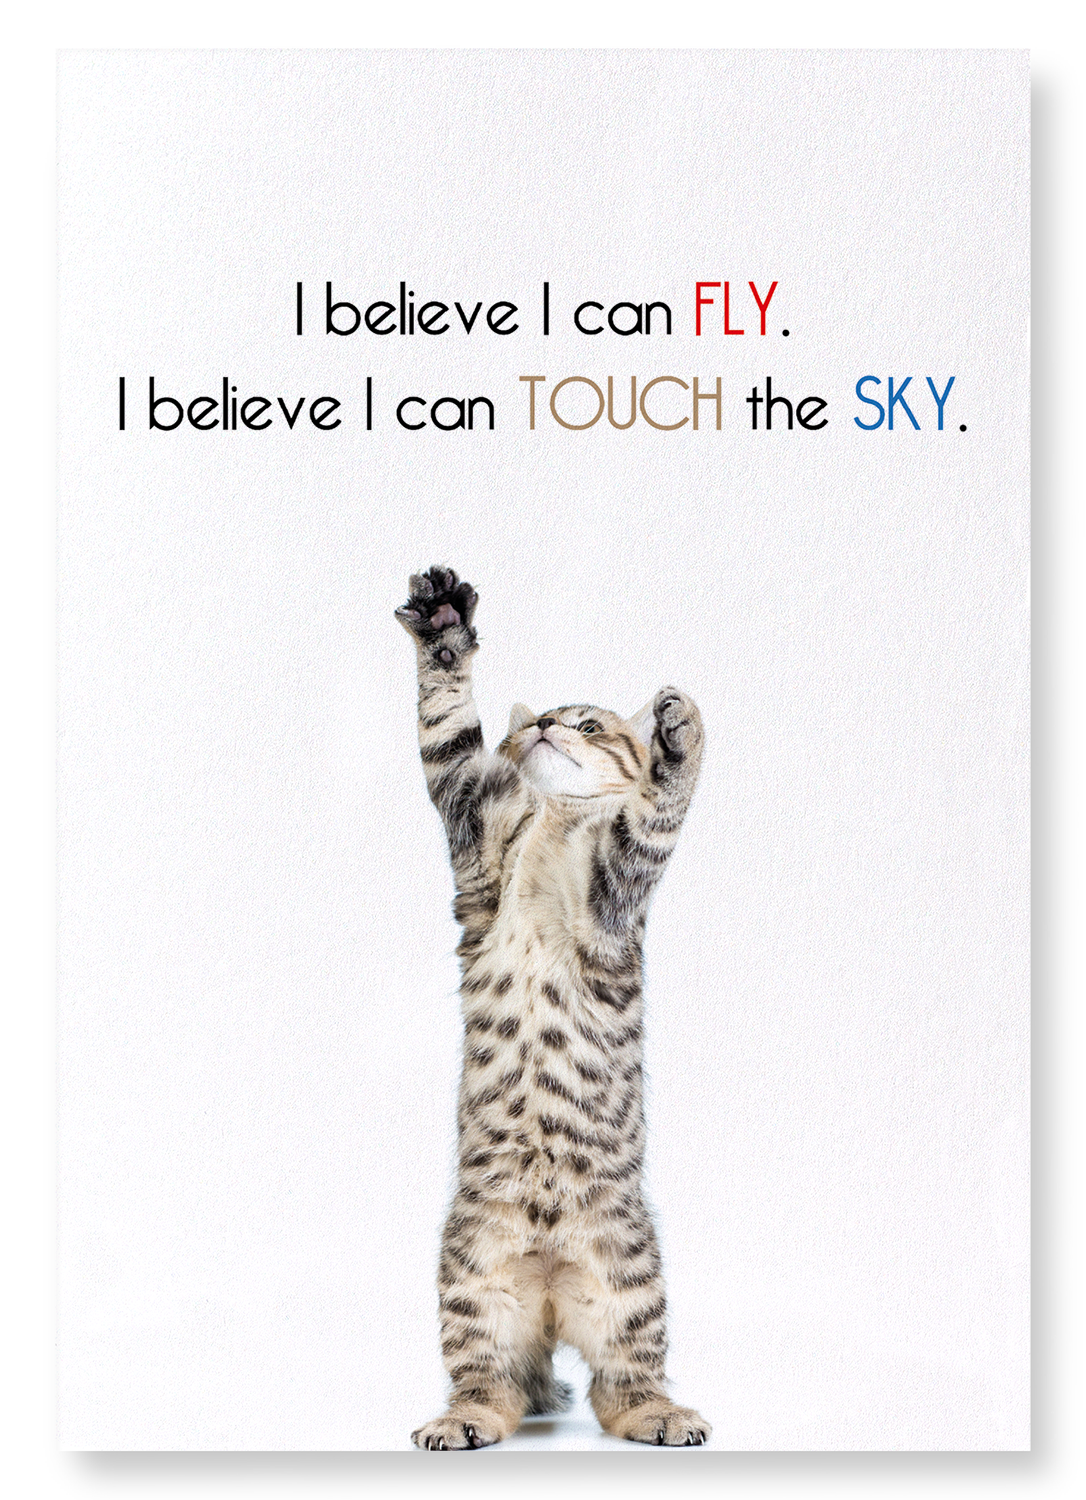 I BELIEVE I CAN FLY